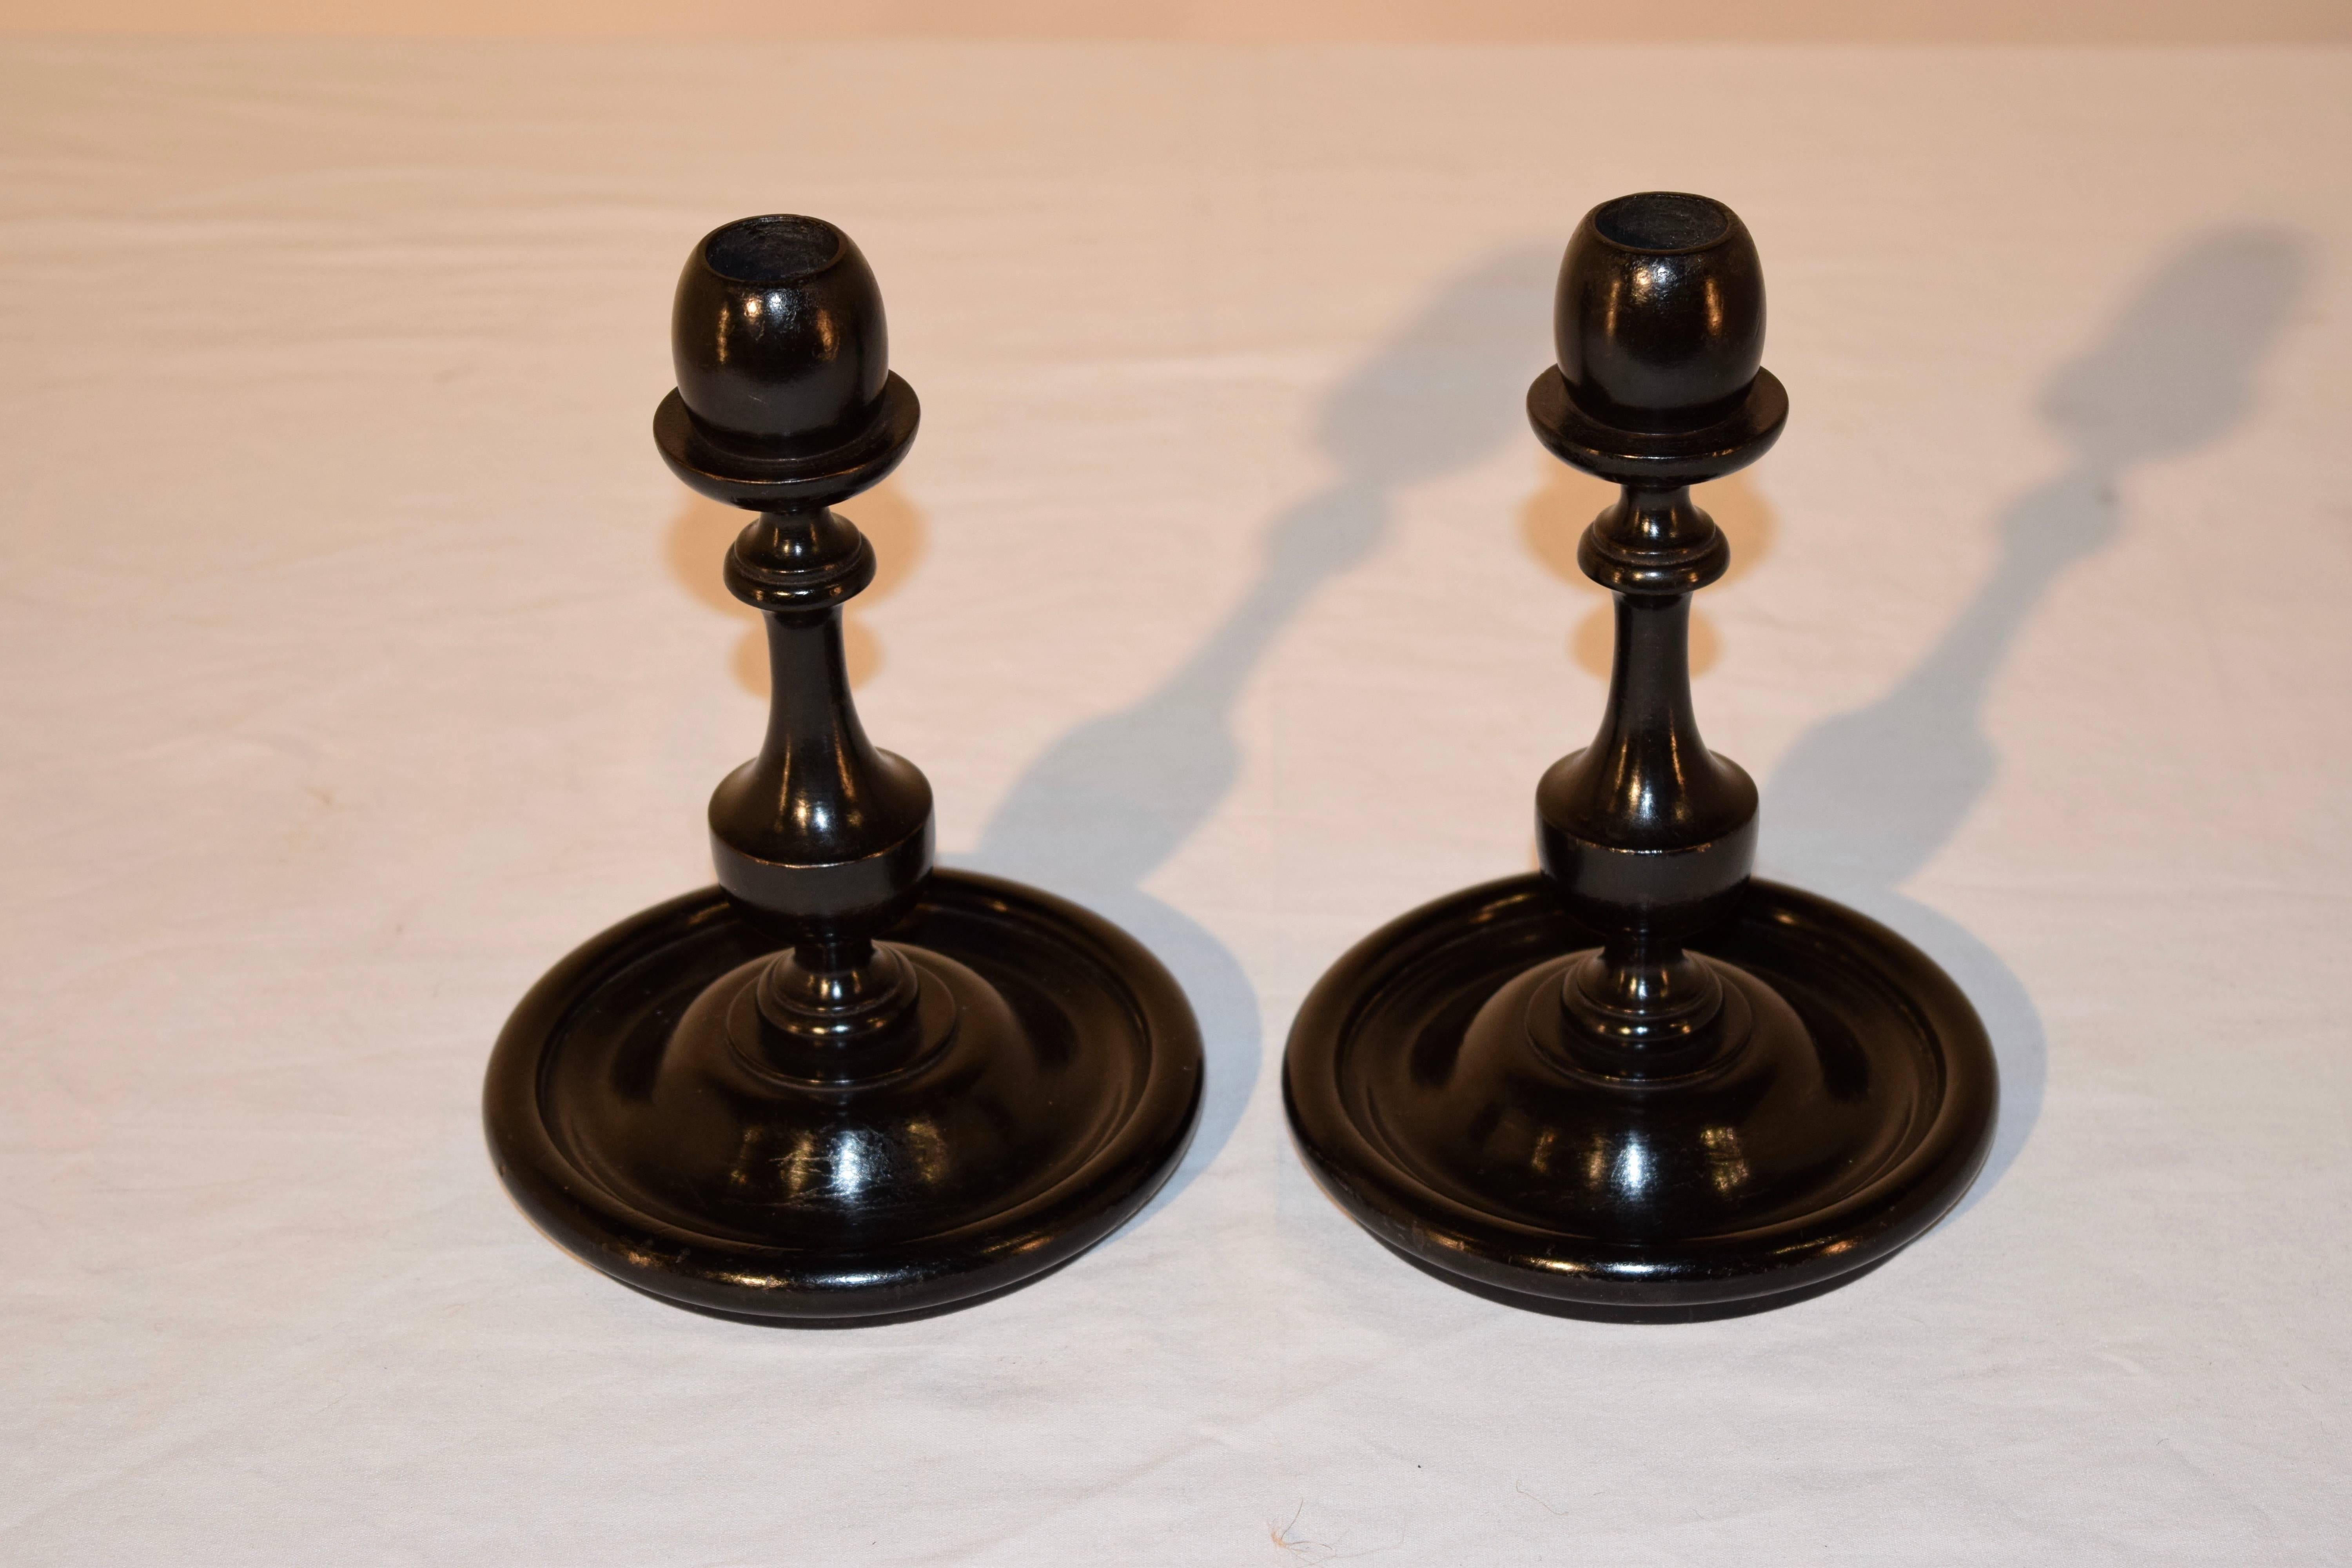 19th century pair of ebonized candlesticks with lovely turnings and supported on a turned dish base.